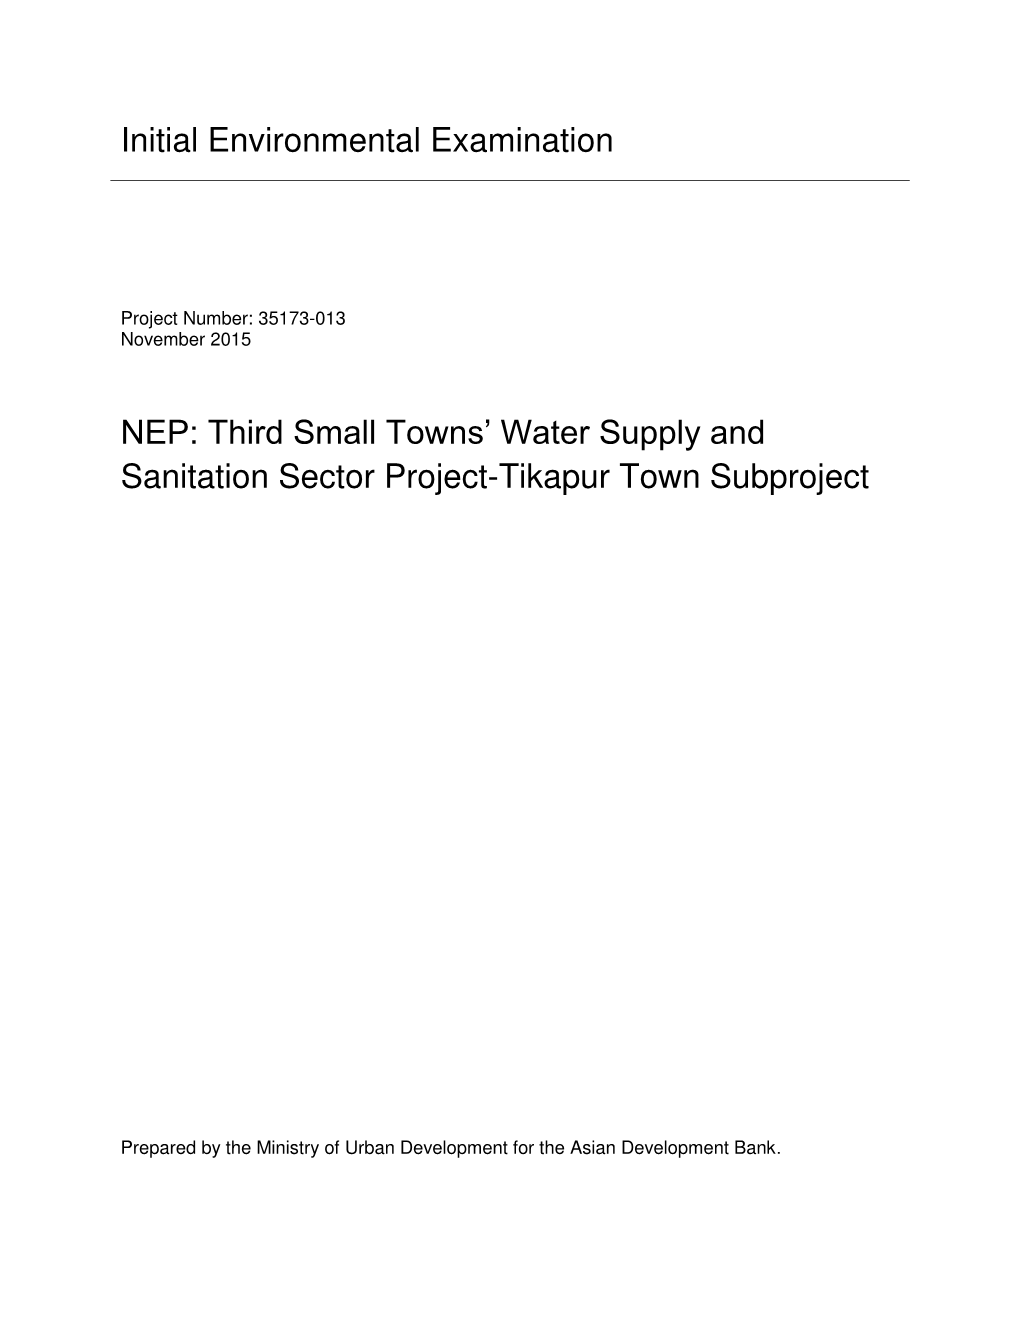 Third Small Towns' Water Supply and Sanitation Sector Project-Tikapur